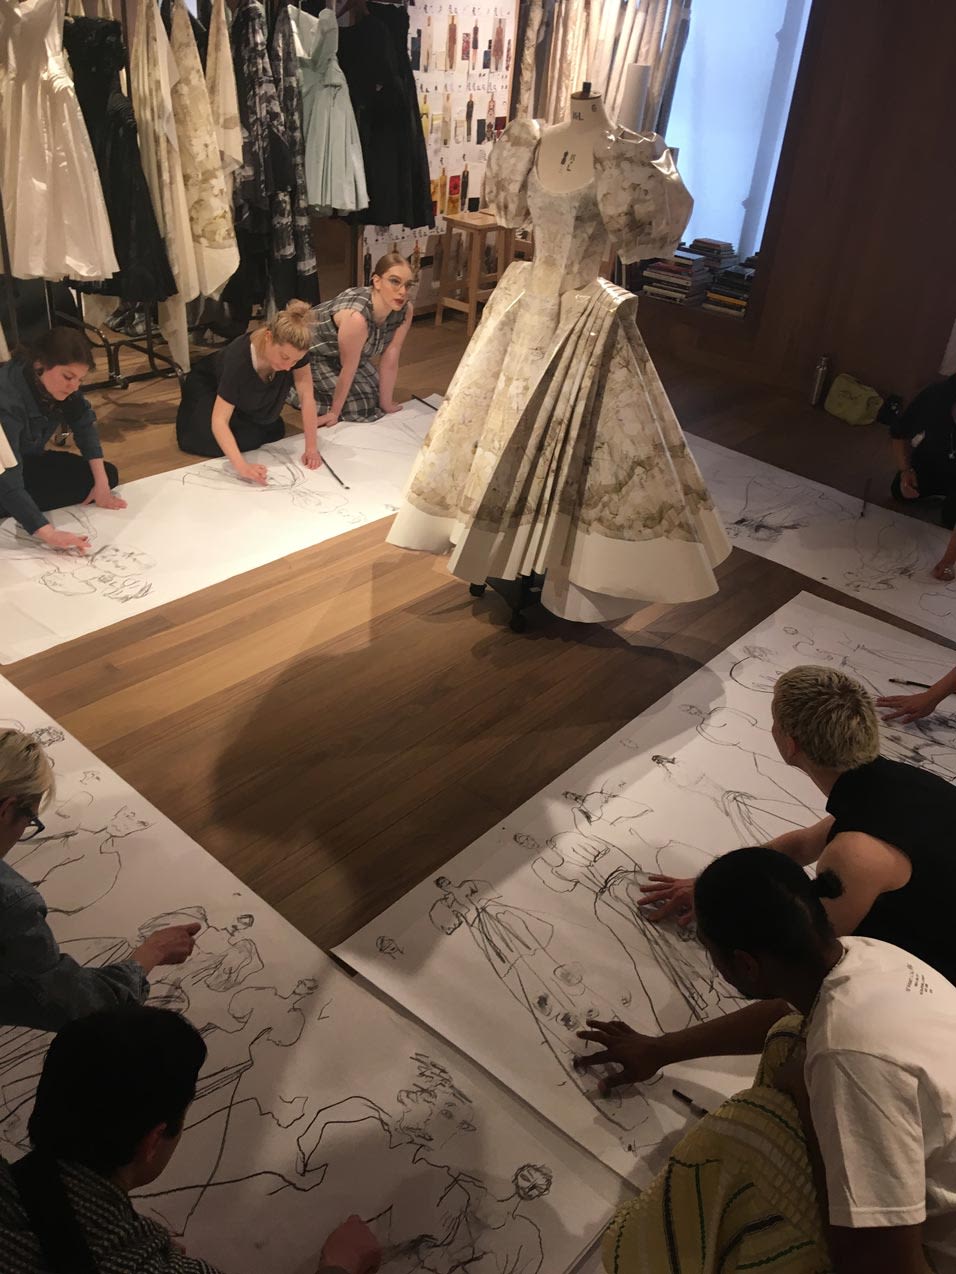 People sitting sketching around dress on stand